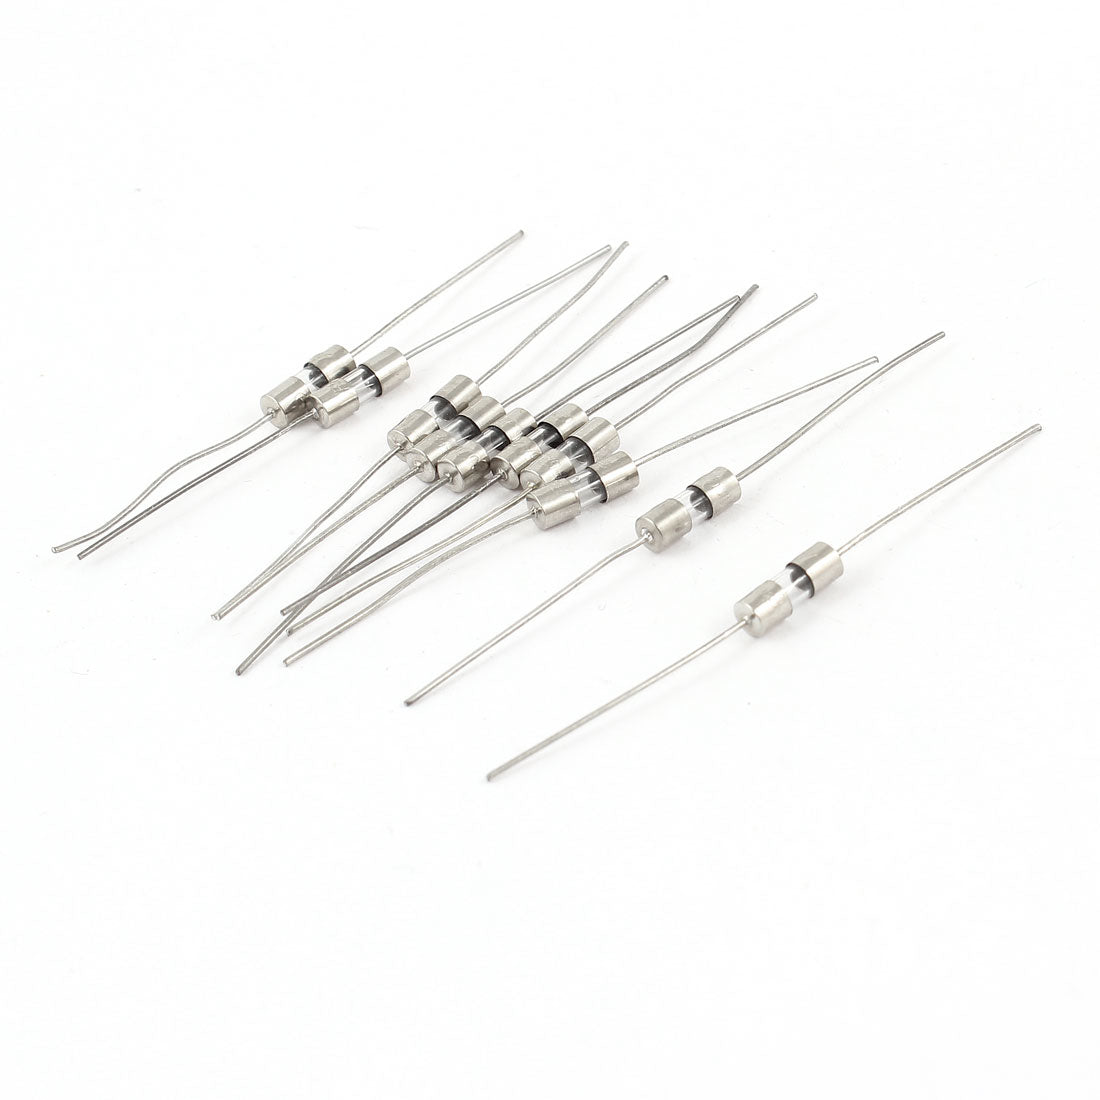 uxcell Uxcell 10 Pcs 3mm x 10mm Axial Leads Fast Acting Glass Fuses Tube 5Amp 250V